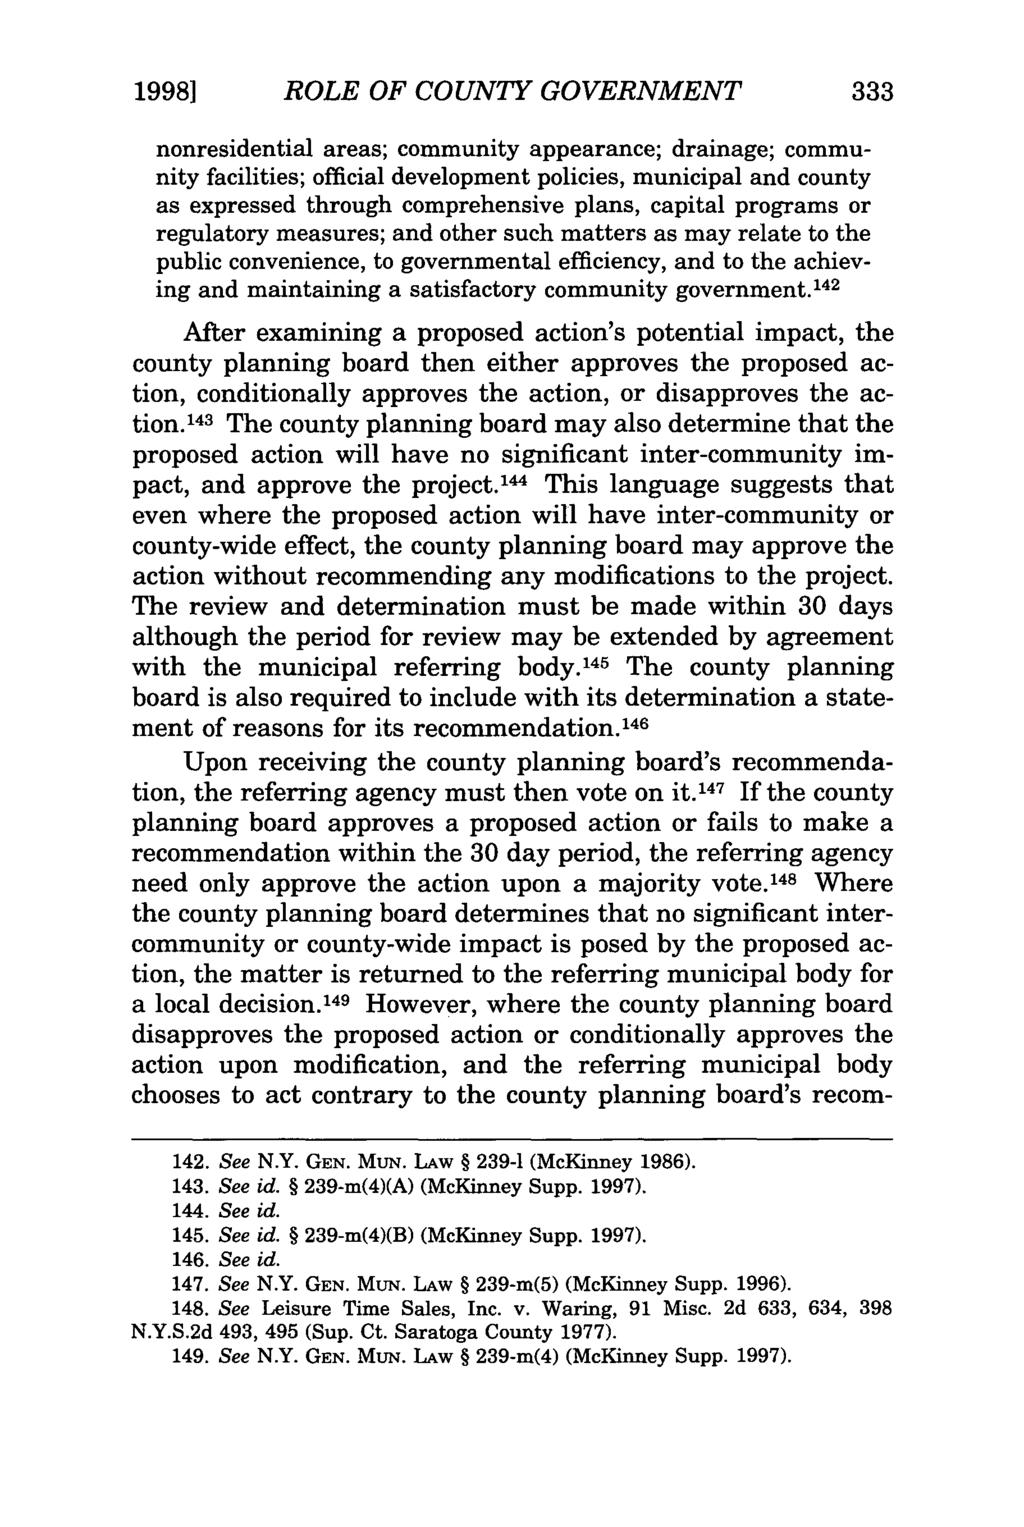 19981 ROLE OF COUNTY GOVERNMENT nonresidential areas; community appearance; drainage; community facilities; official development policies, municipal and county as expressed through comprehensive